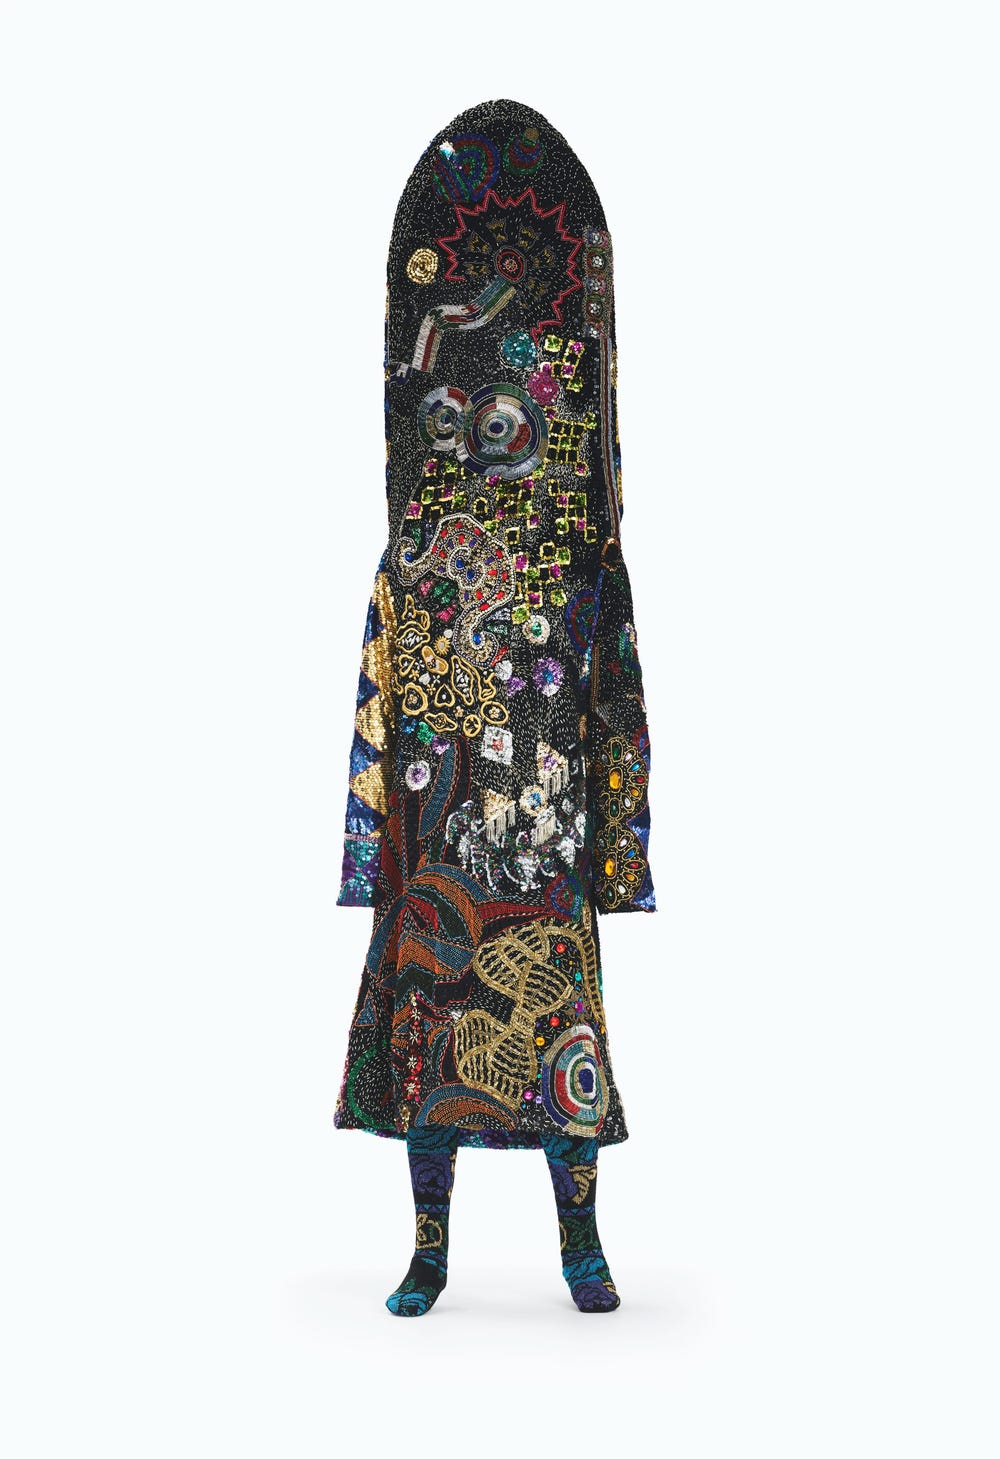 mannequin wearing an embellished full-body garment